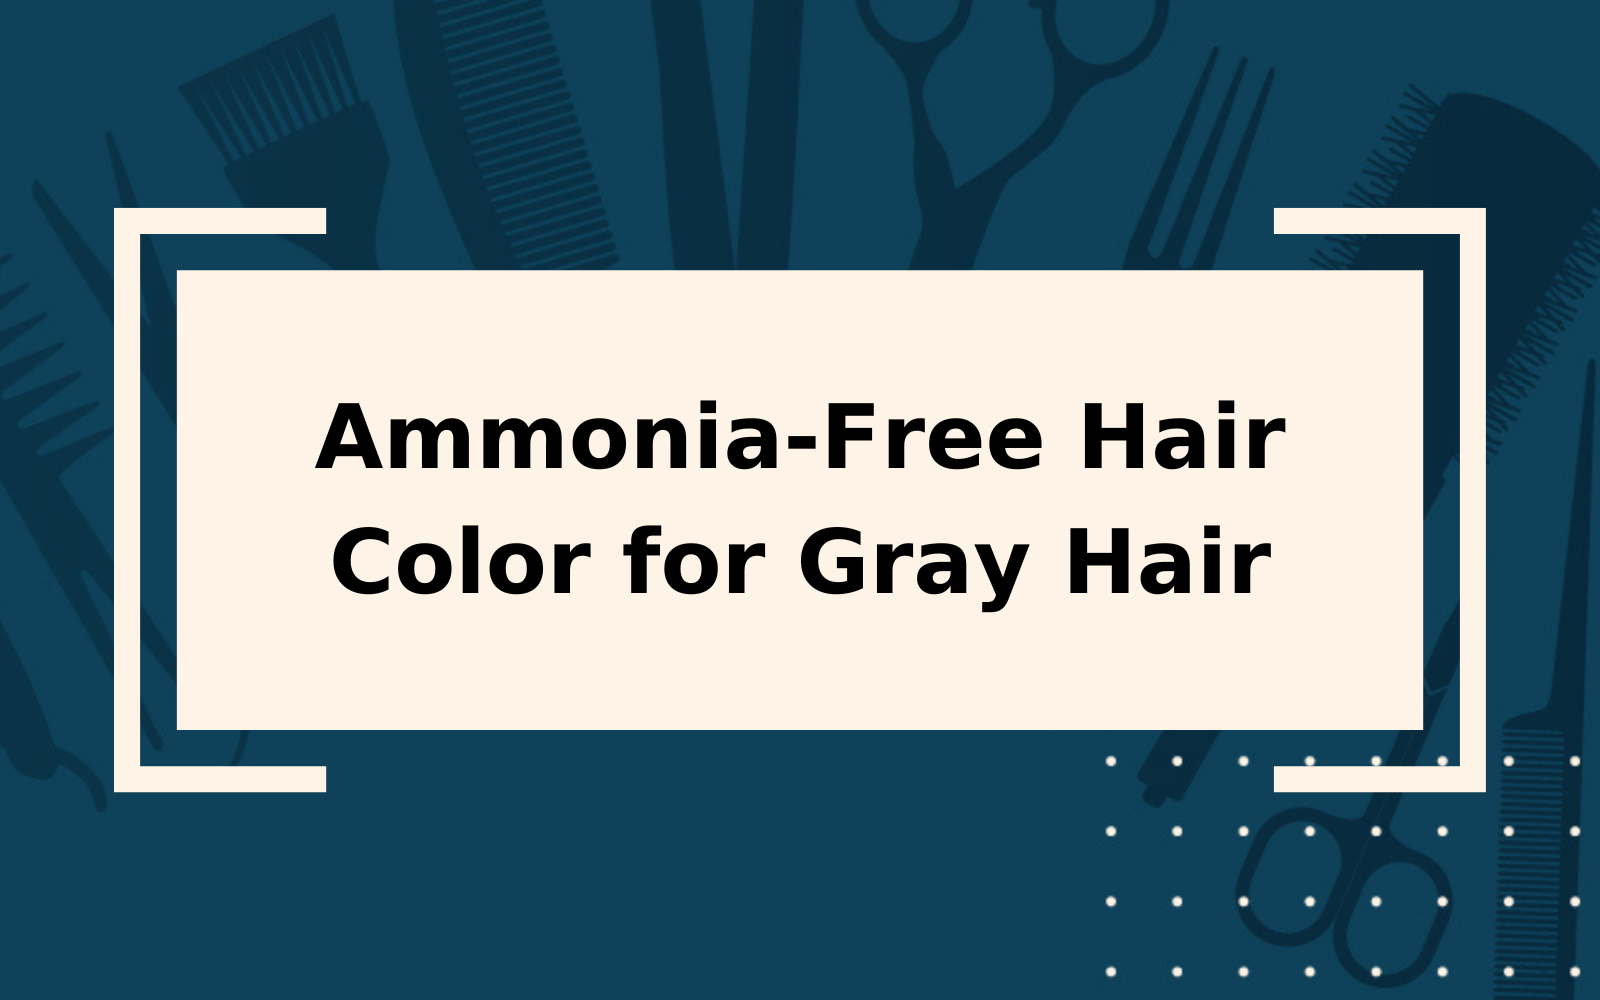 Using the Best Ammonia-Free Hair Colors to Cover Gray